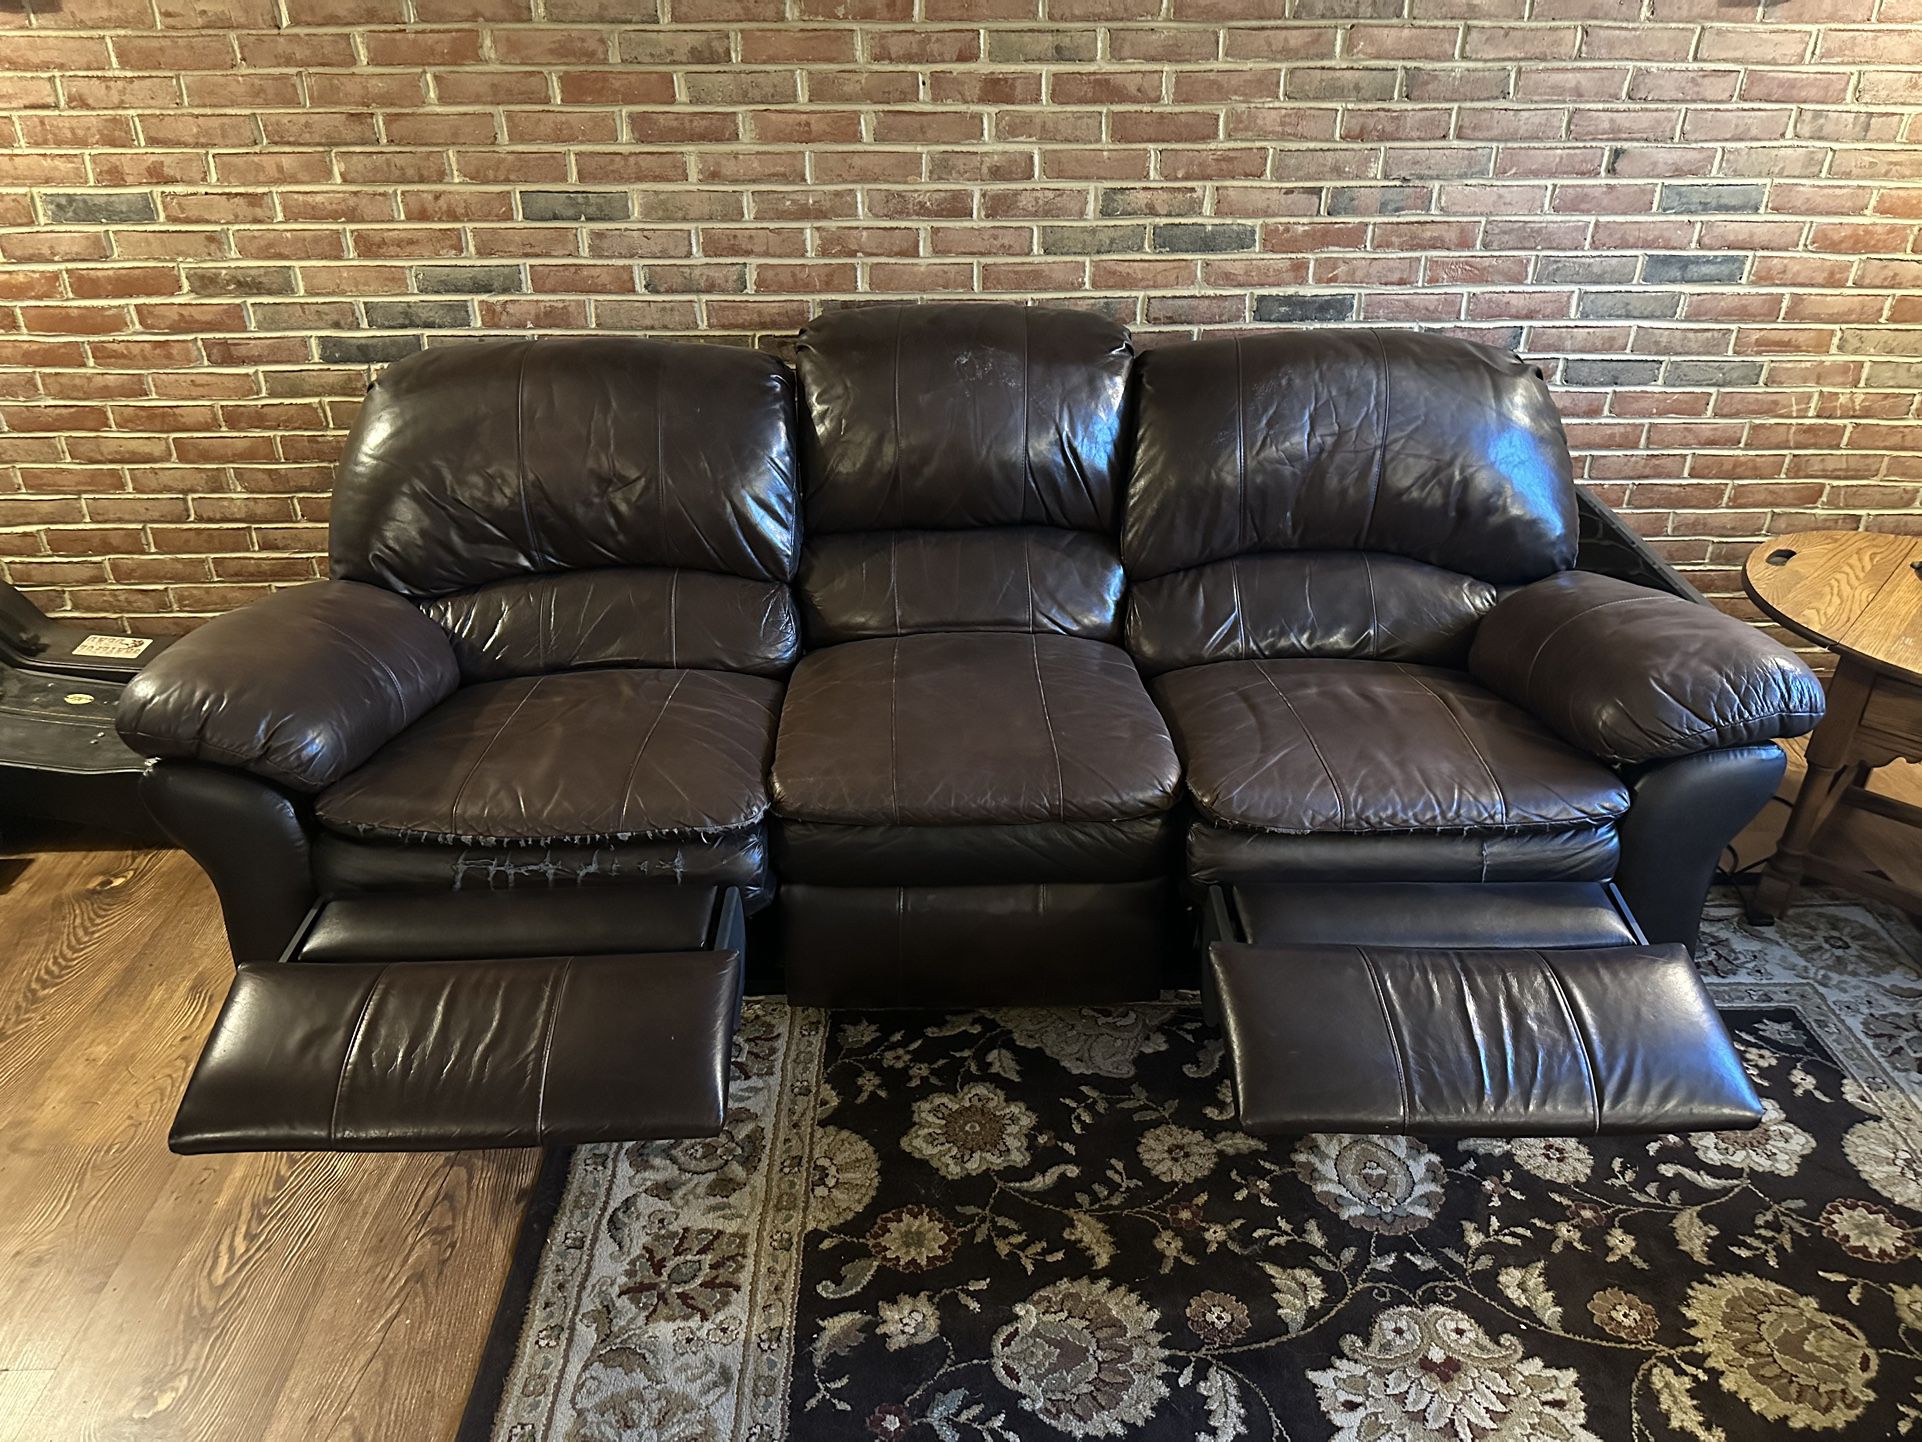 Reclining Couch And Love Seat